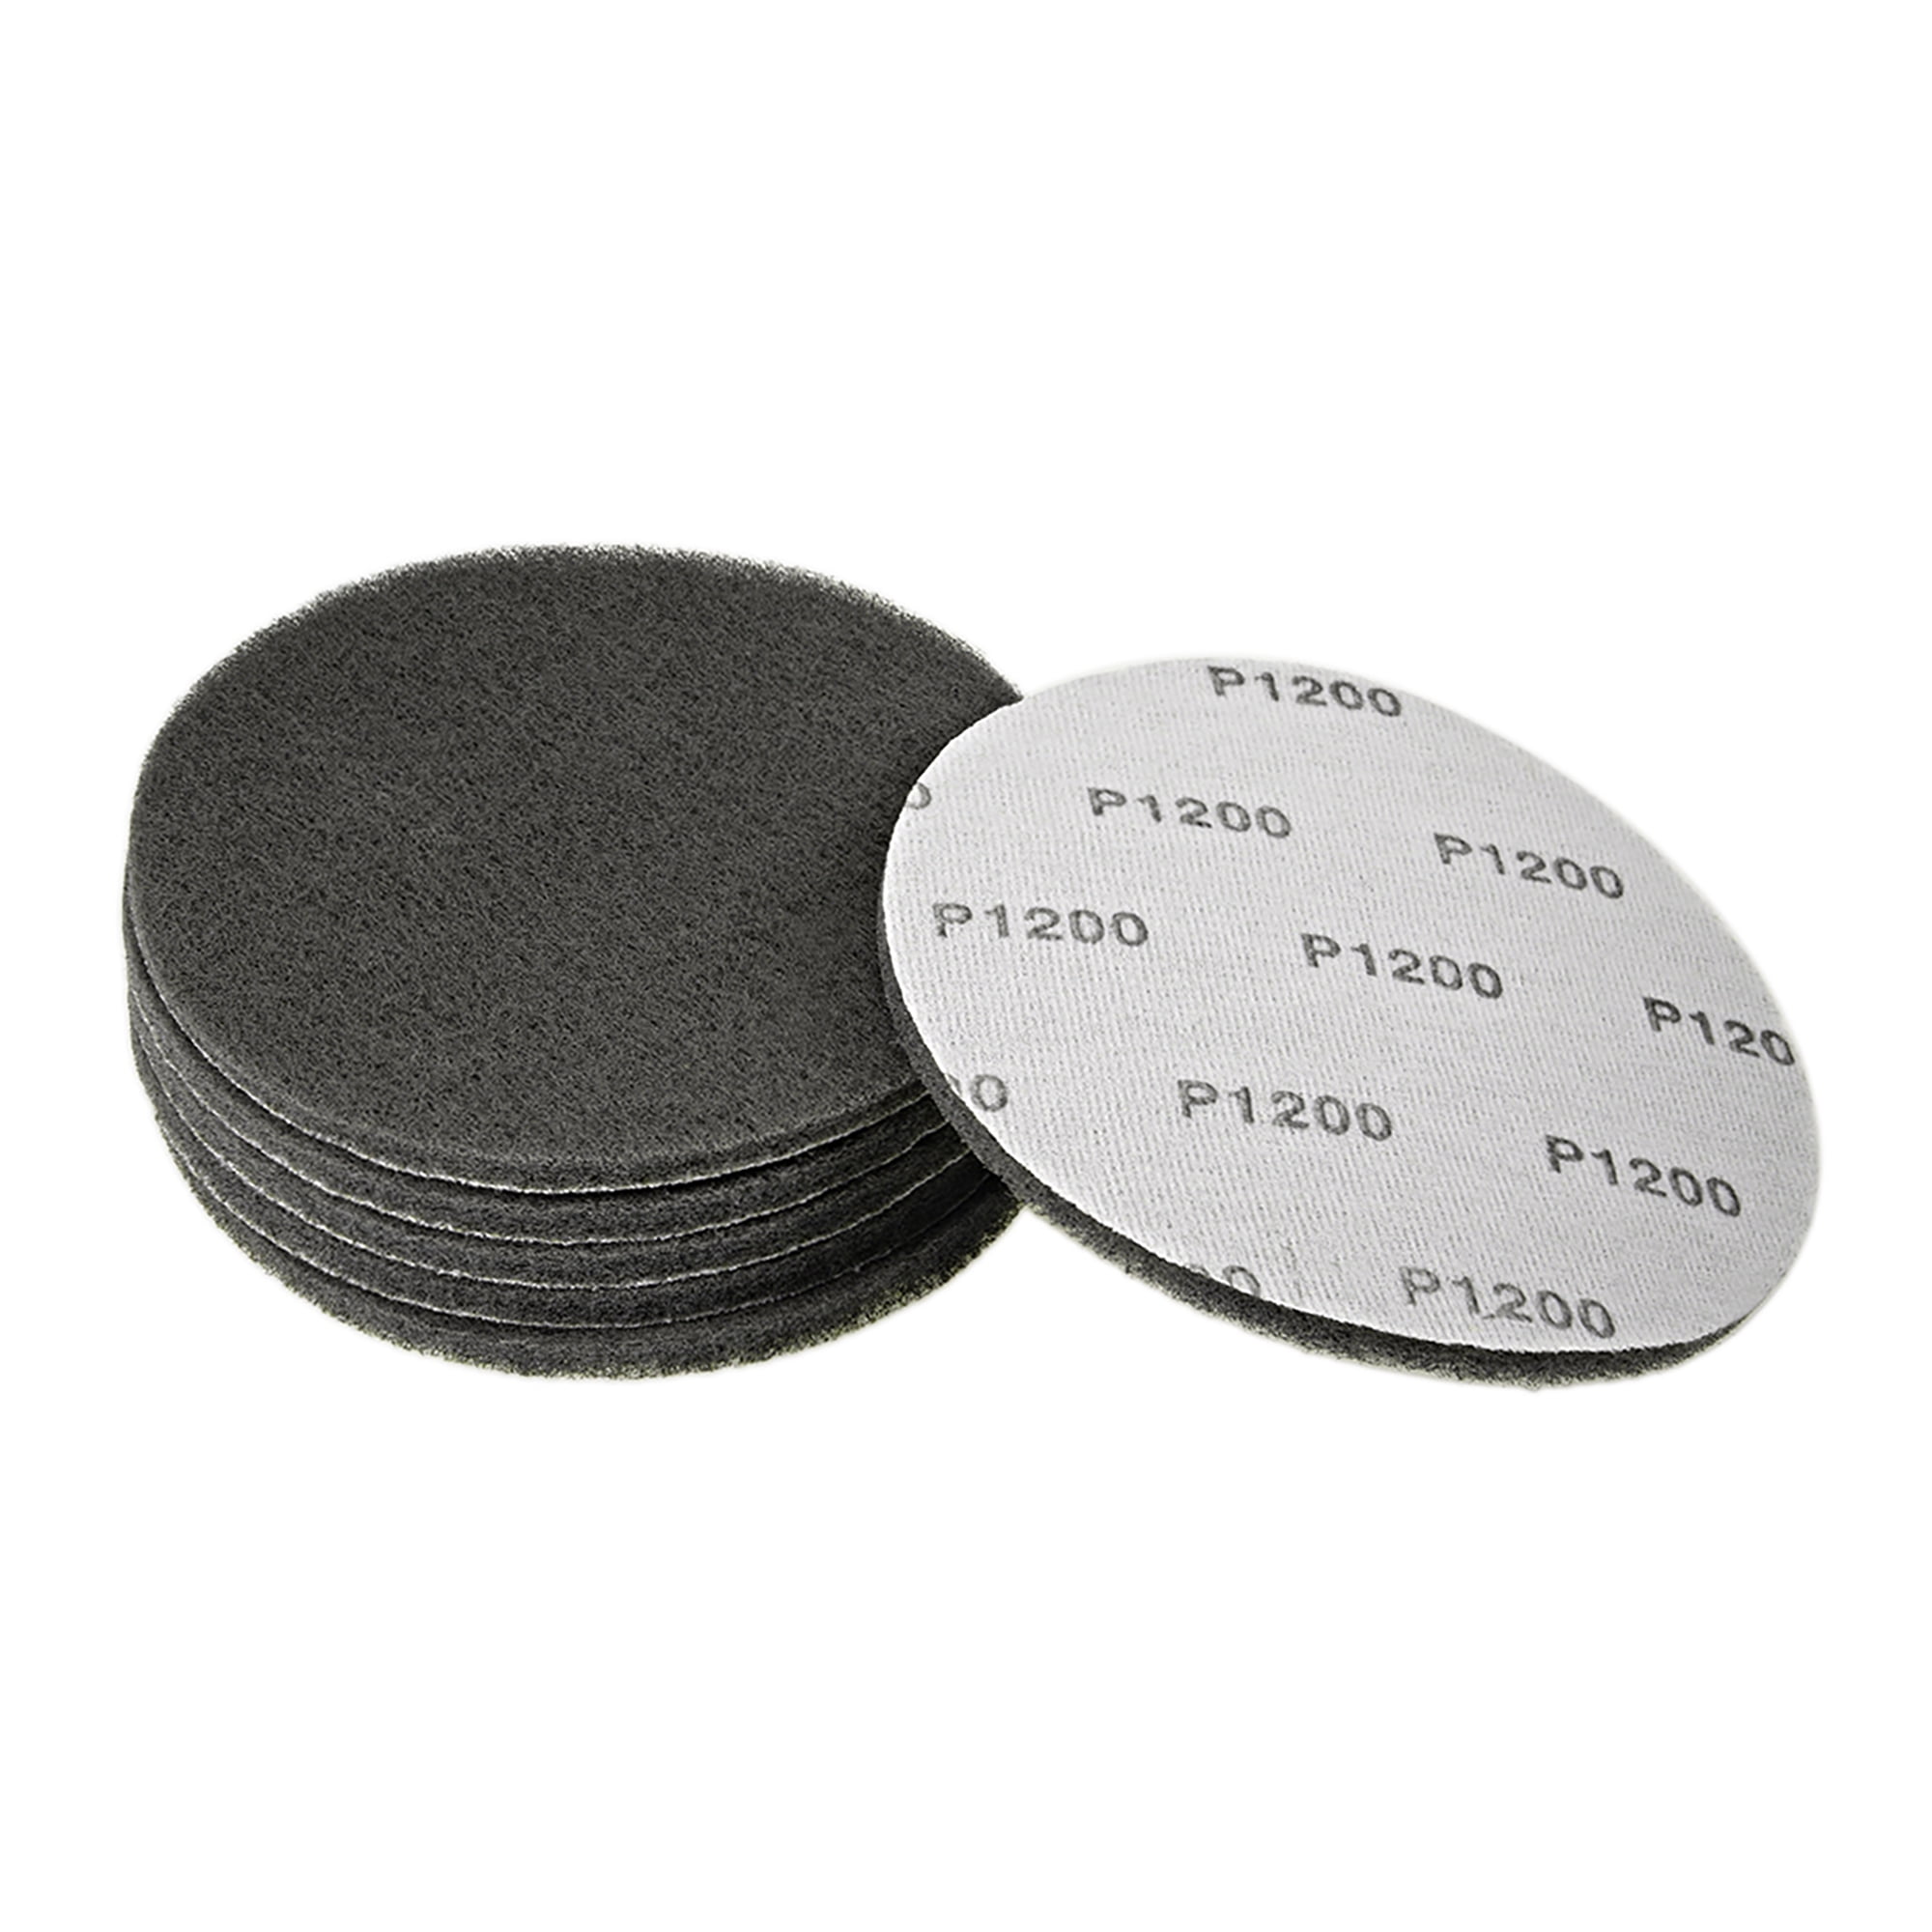 Details about   5Inch 1500 Grit Drill Power Brush Tile Scrubber Scouring Pads Cleaning Tool 2pcs 